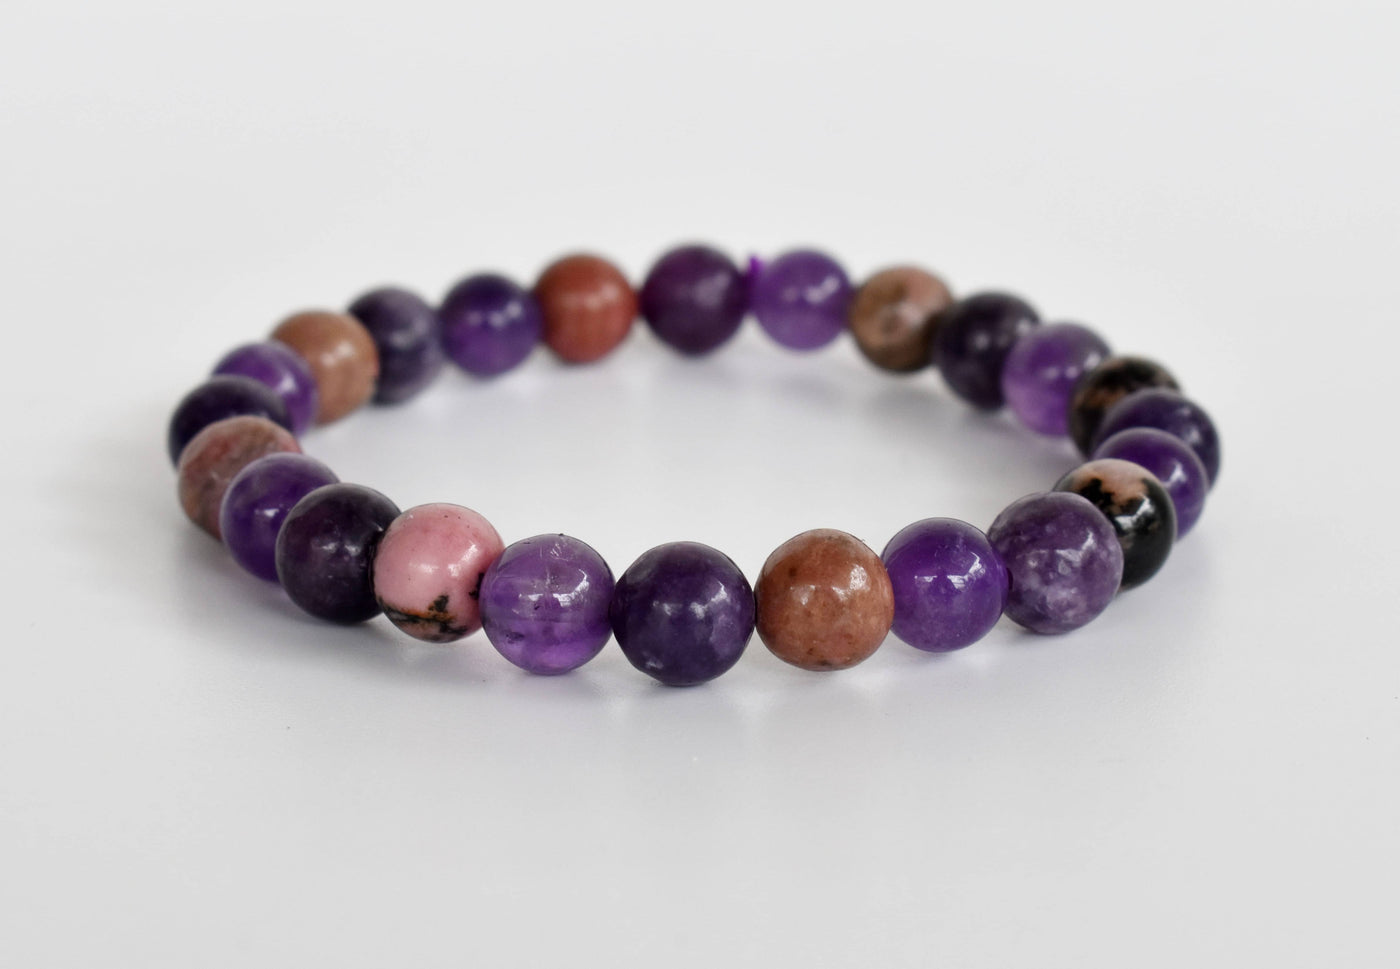 Brings RELAXATION Crystal Bracelet (Calming, Anti-Stress, Strength)